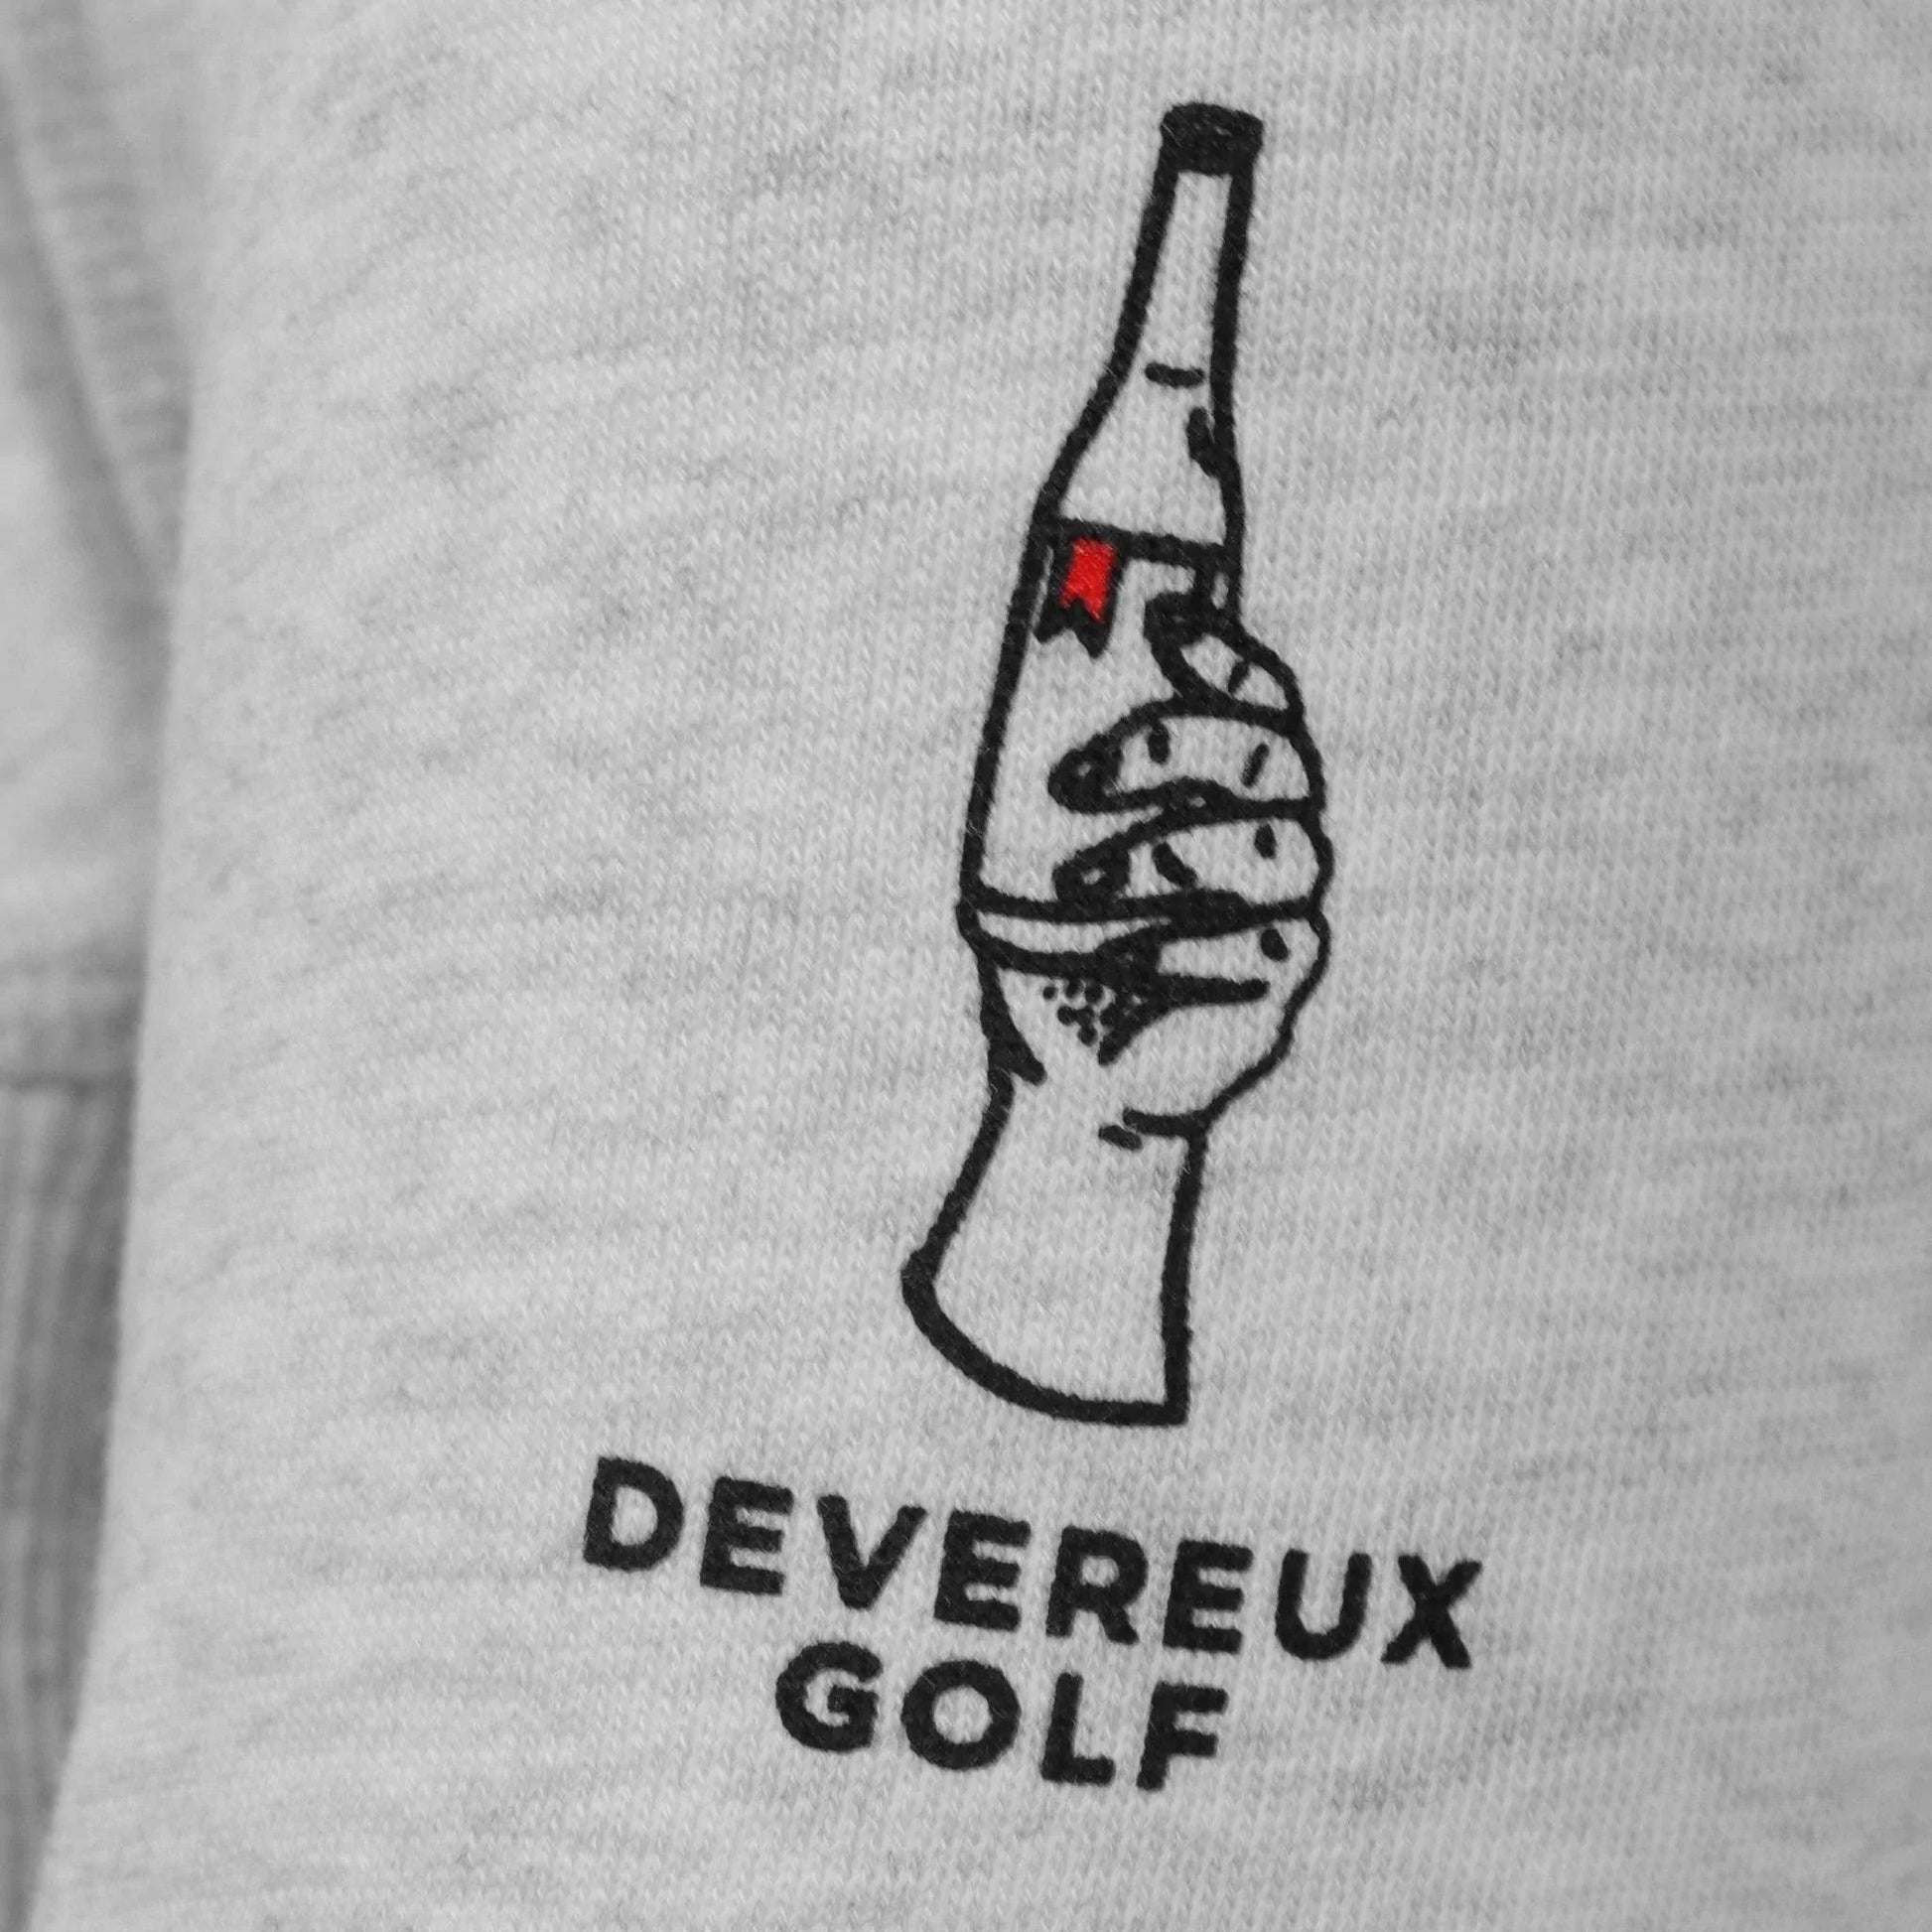 Close up of screen printed Devereaux Golf logo on sleeve